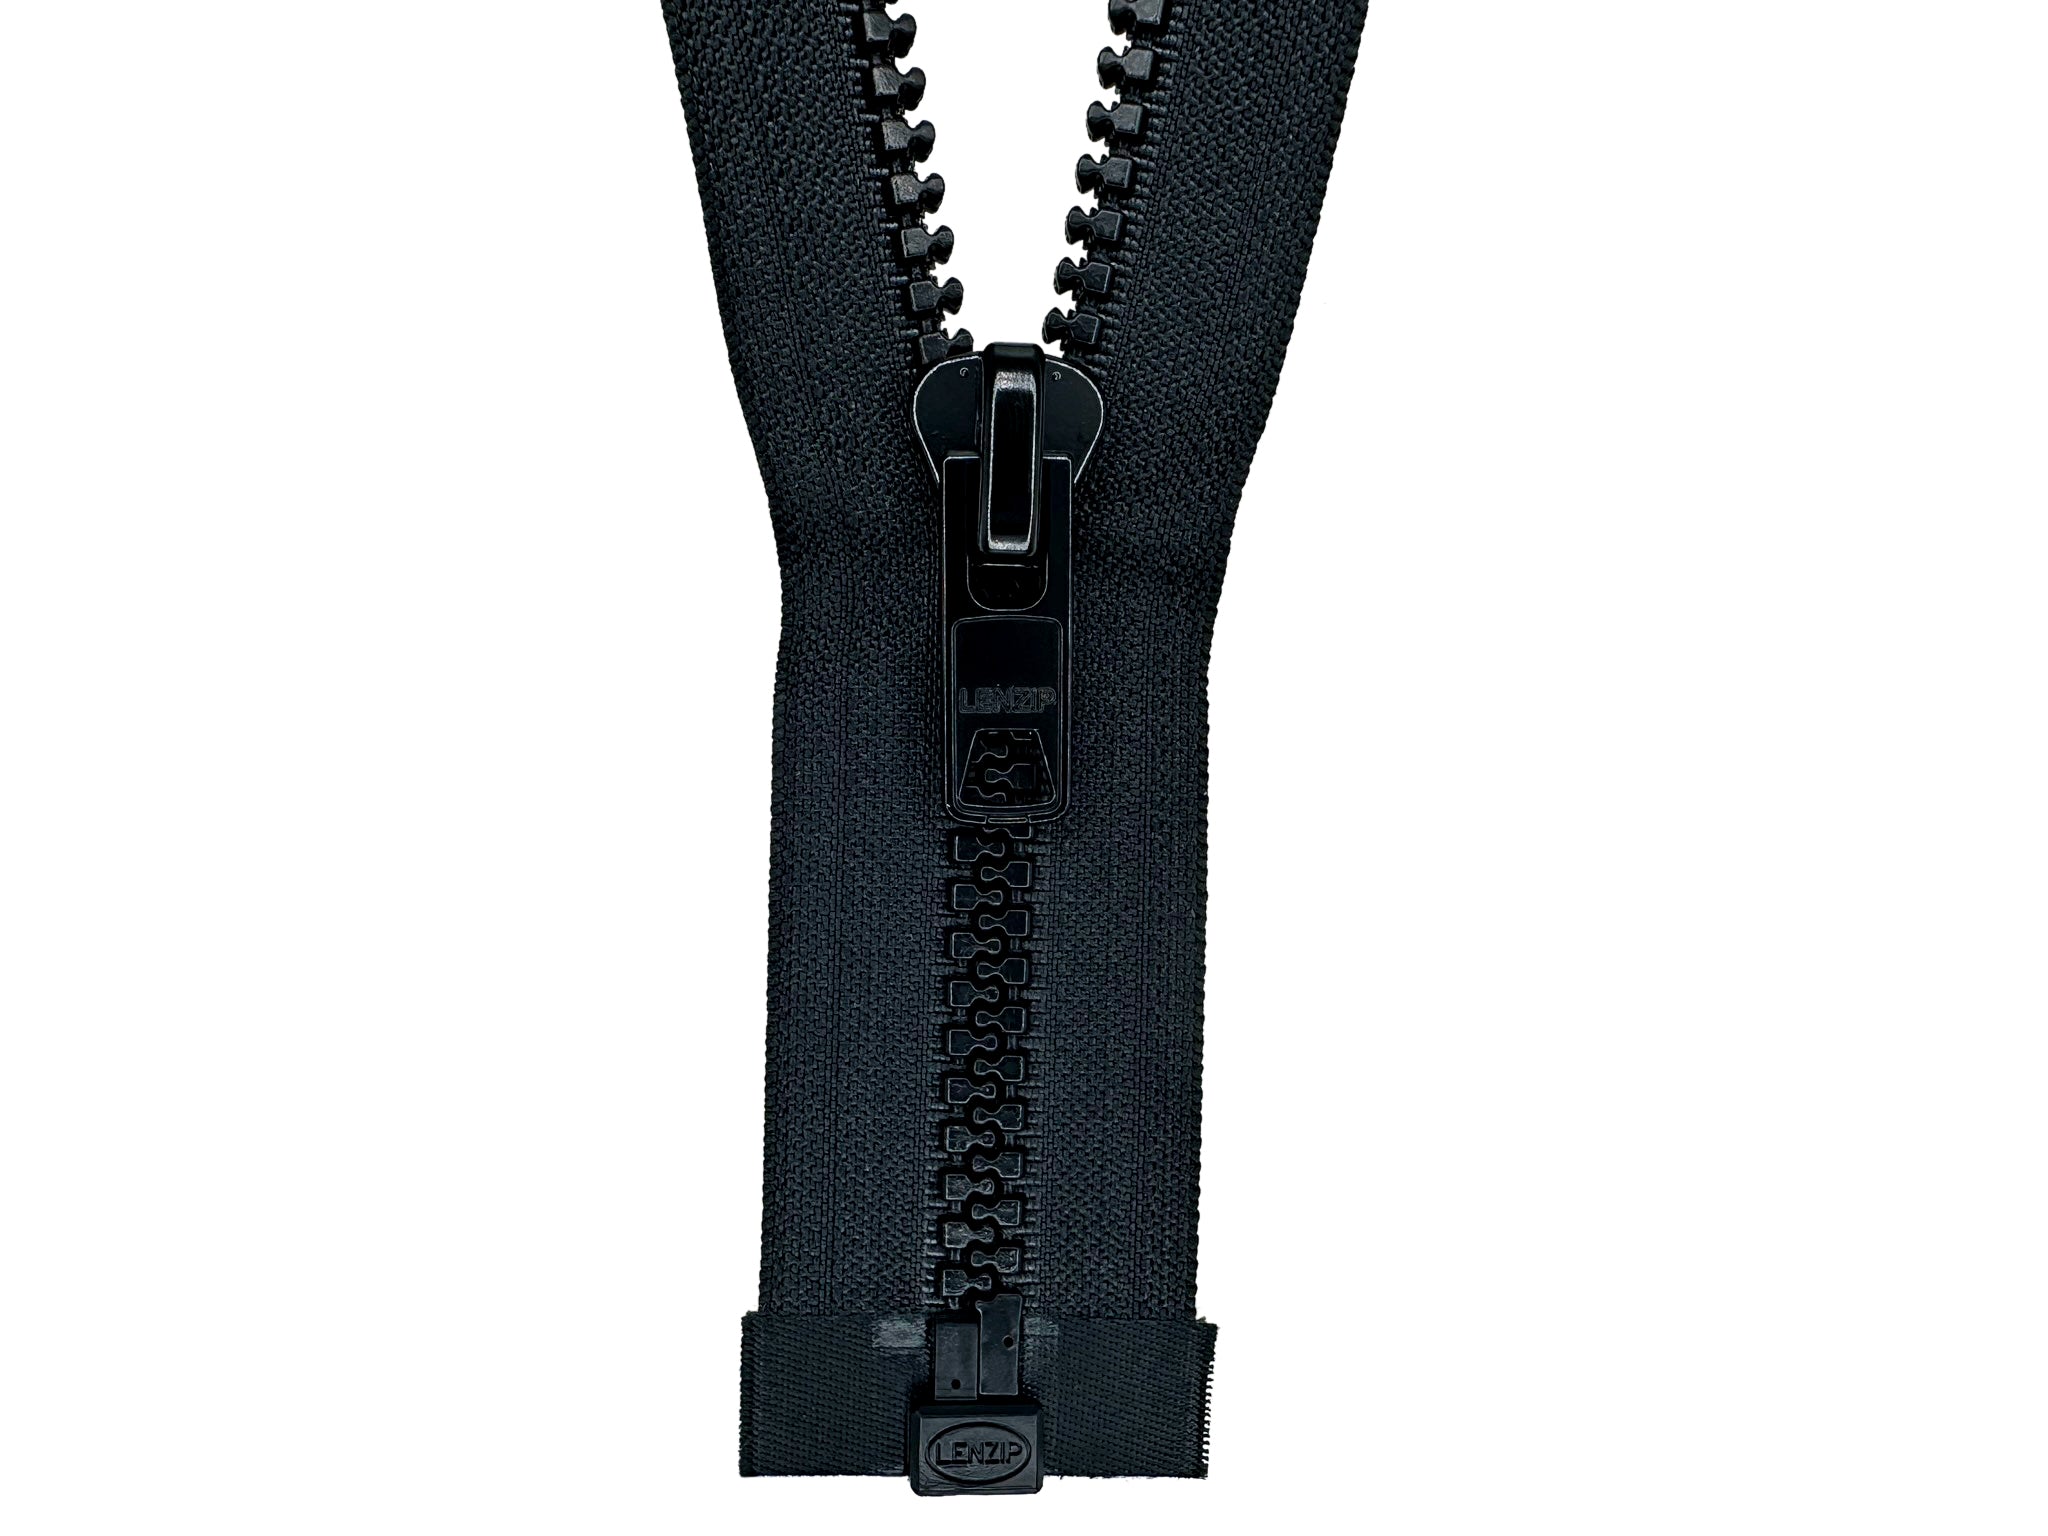 Two-Way (Double or Dual) Zippers